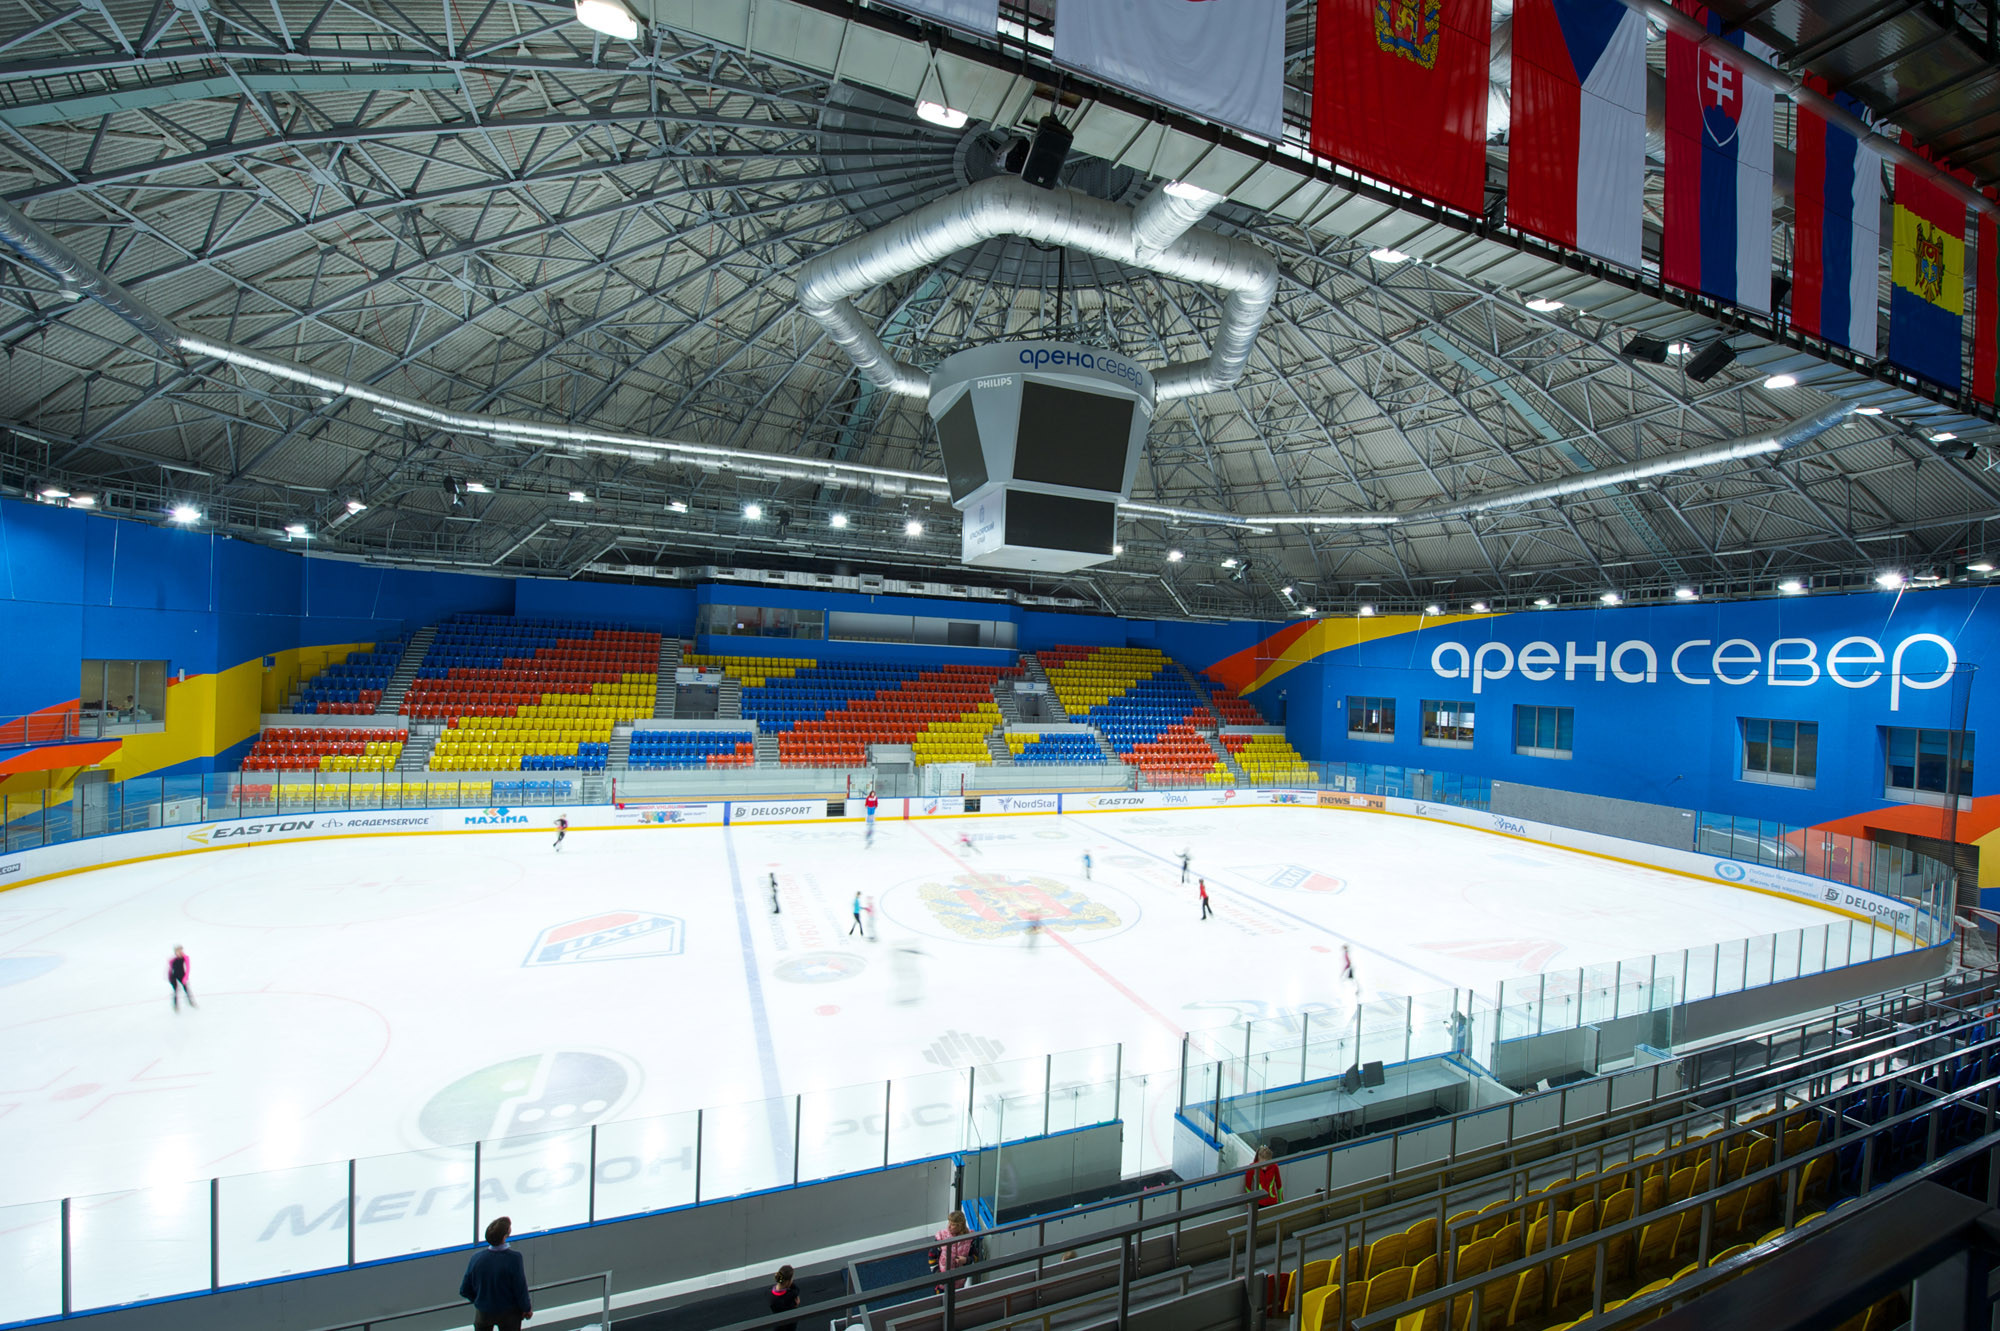 Krasnoyarsk awarded funding by Russian Government to create 2019 Winter Universiade infrastructure 